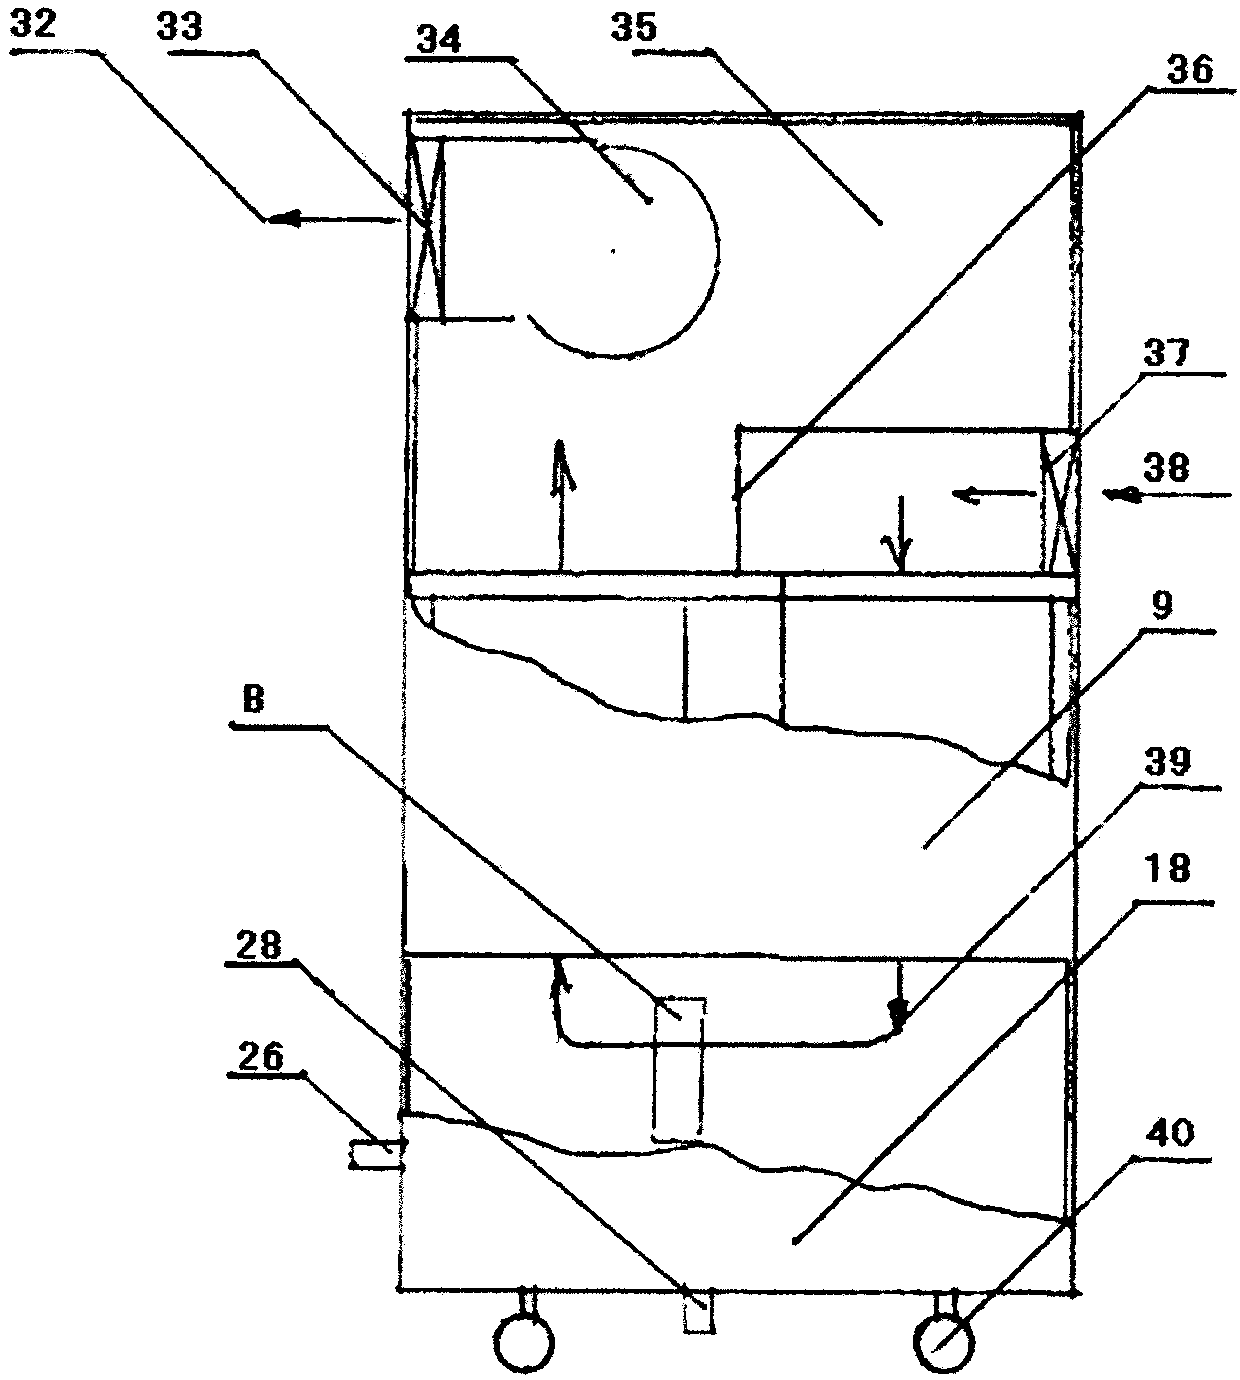 Electronic net air filter device and its application